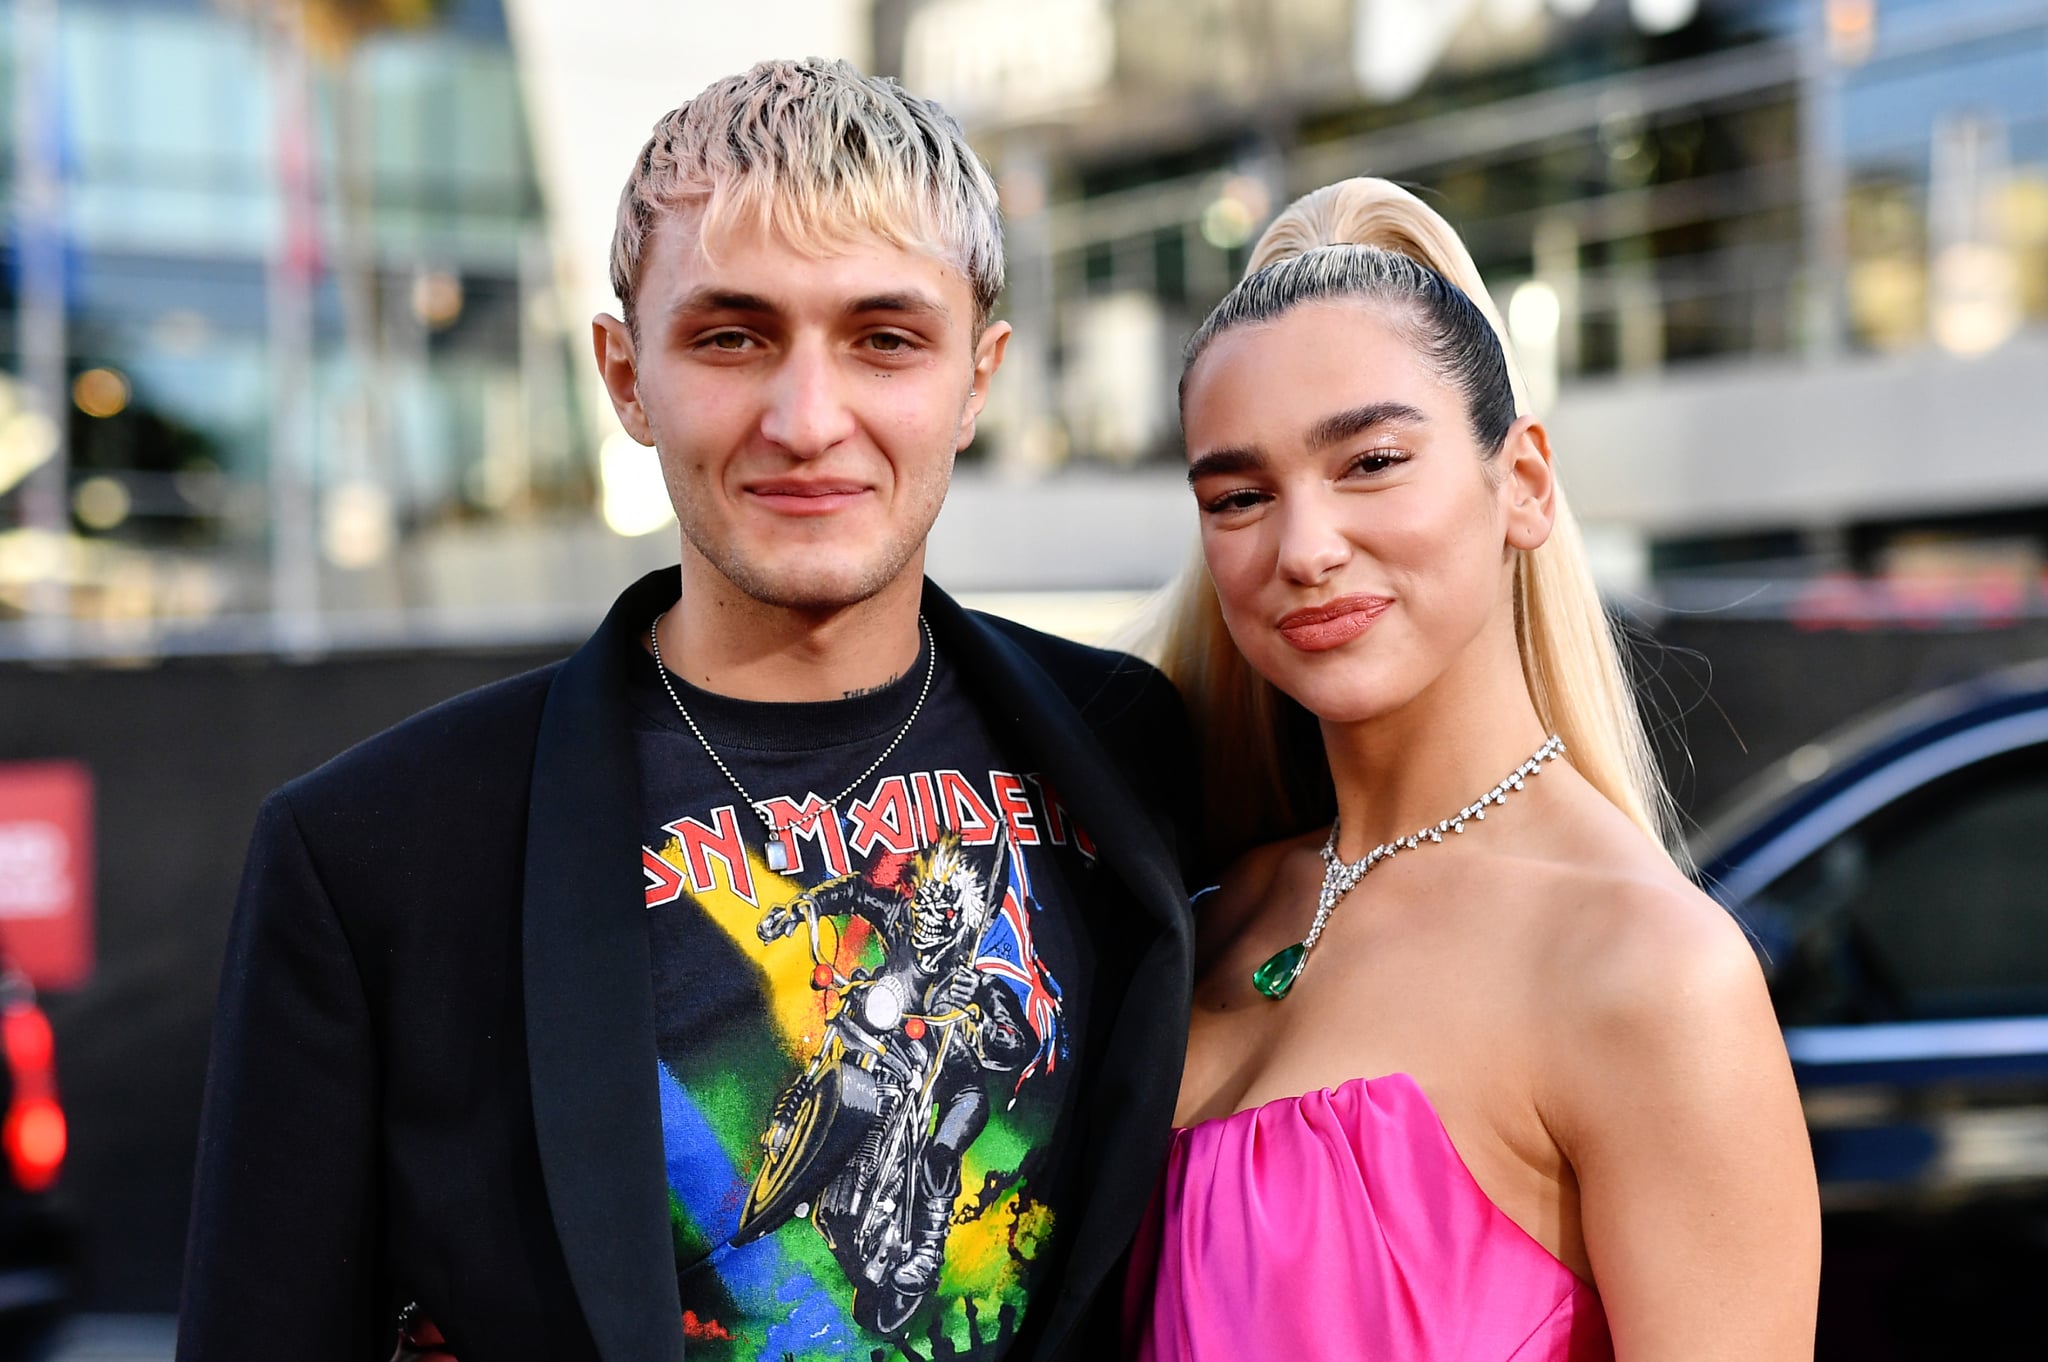 LOS ANGELES, CALIFORNIA - NOVEMBER 24: (L-R) Anwar Hadid and Dua Lipa attend the 2019 American Music Awards at Microsoft Theatre on November 24, 2019 in Los Angeles, California. (Photo by Emma McIntyre/Getty Images for dcp)